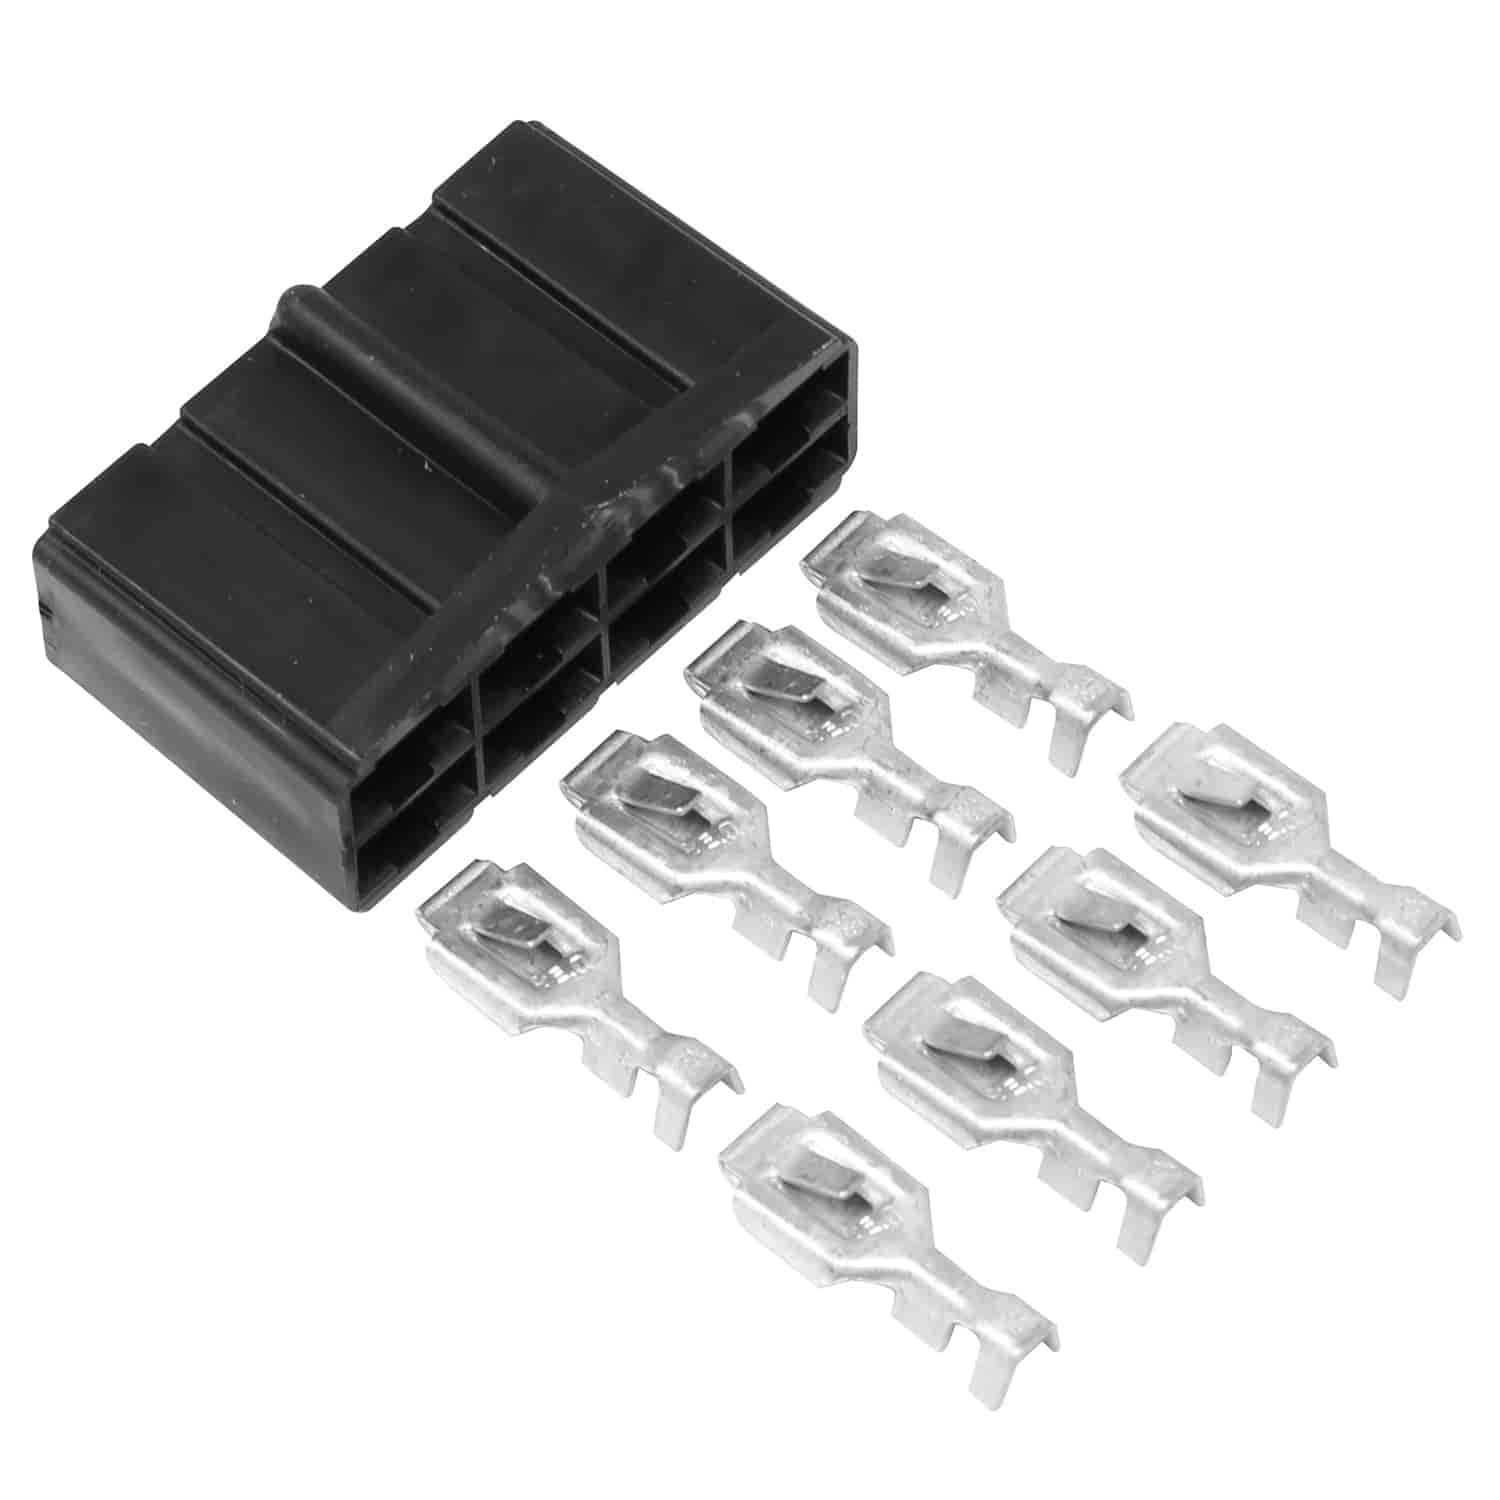 Female Connector 8-Way 56 Series